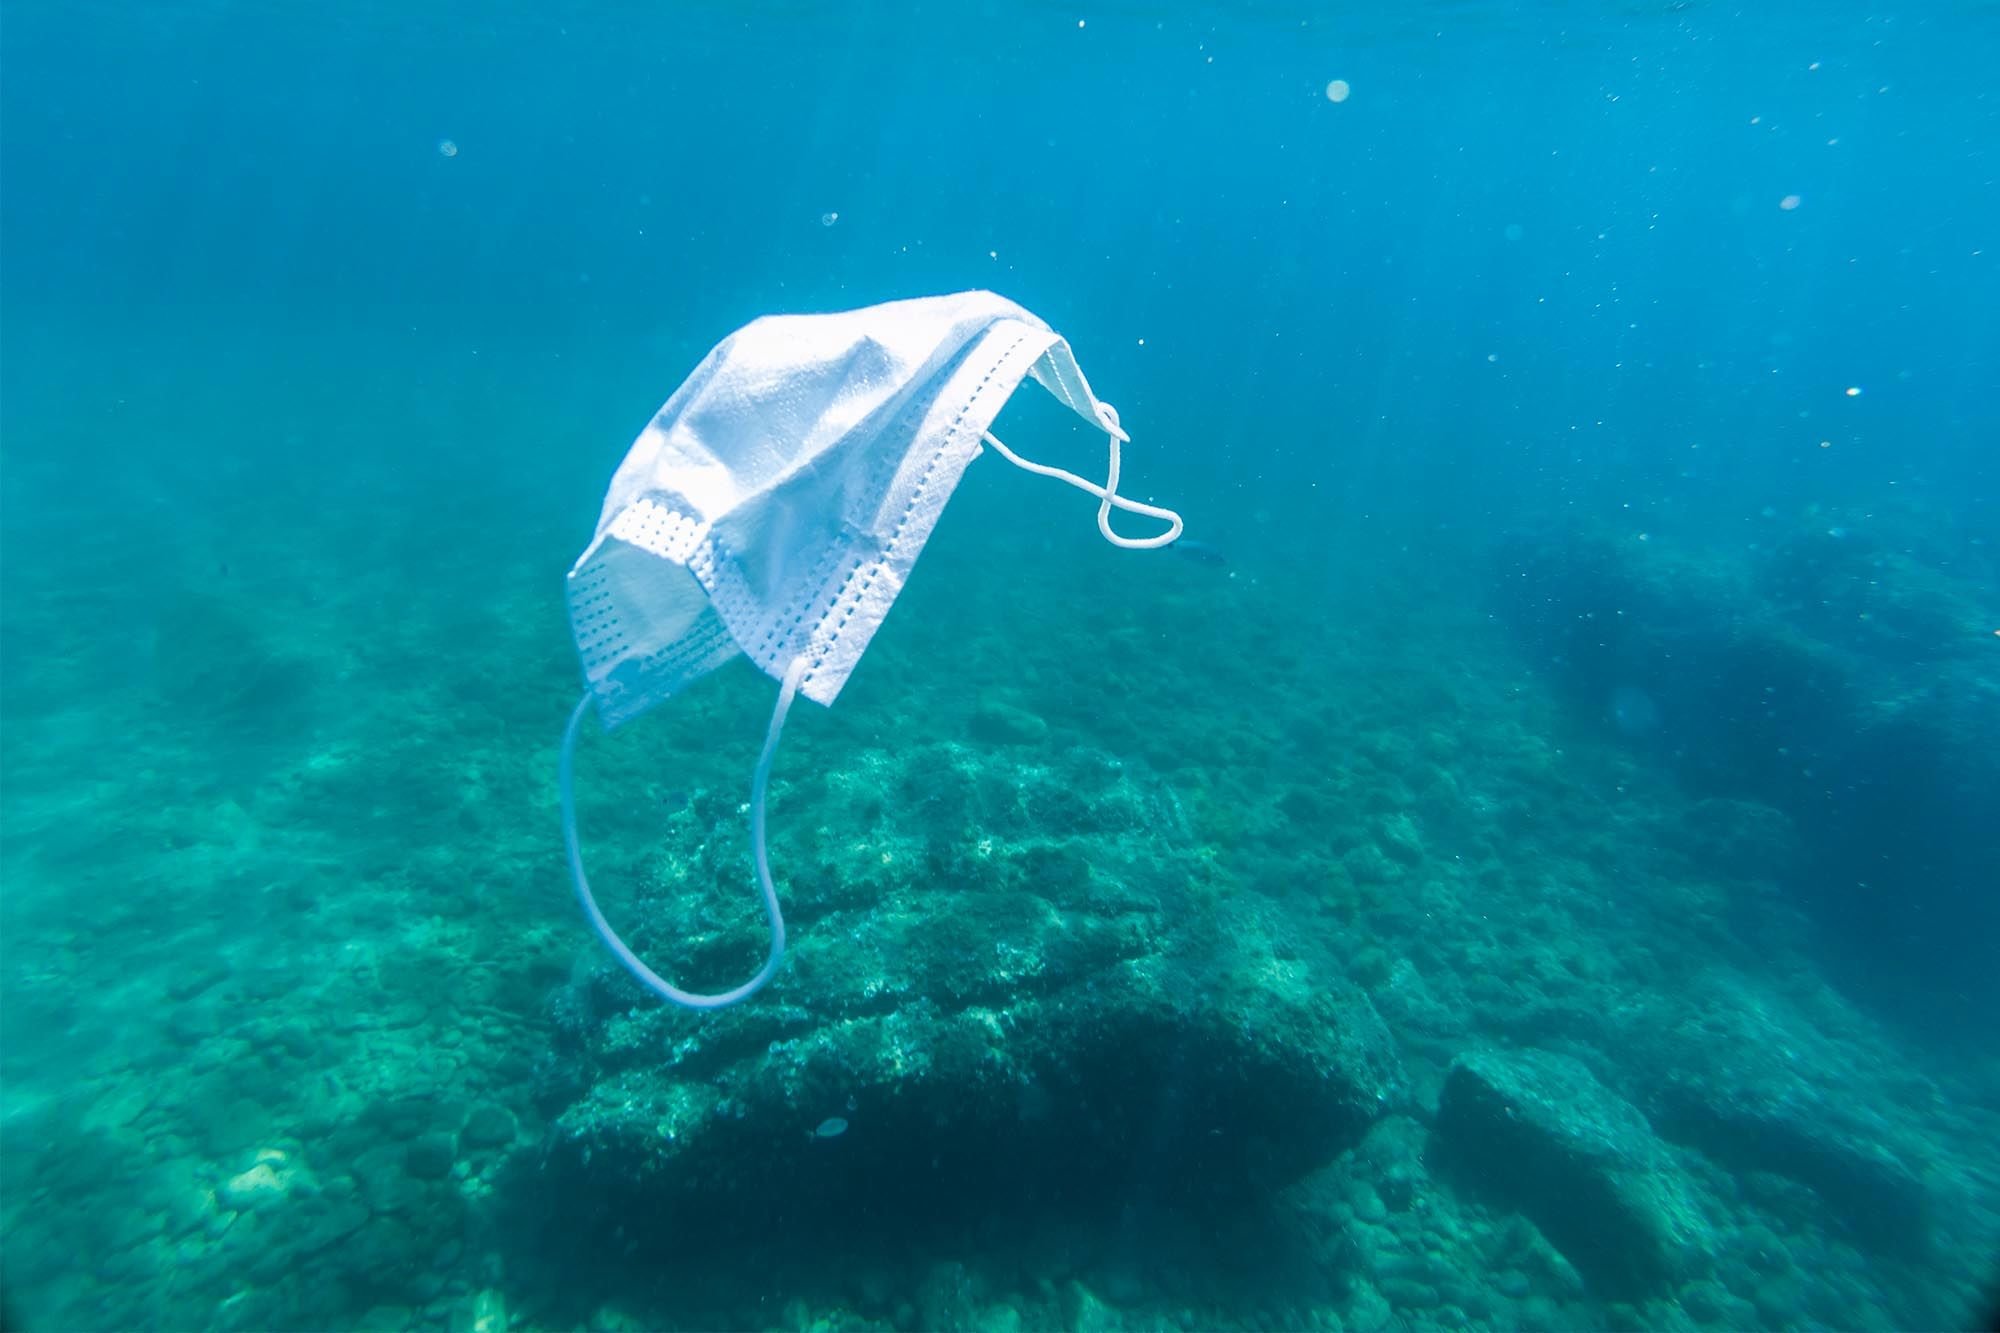 More than 1.5B masks will pollute oceans this year: report